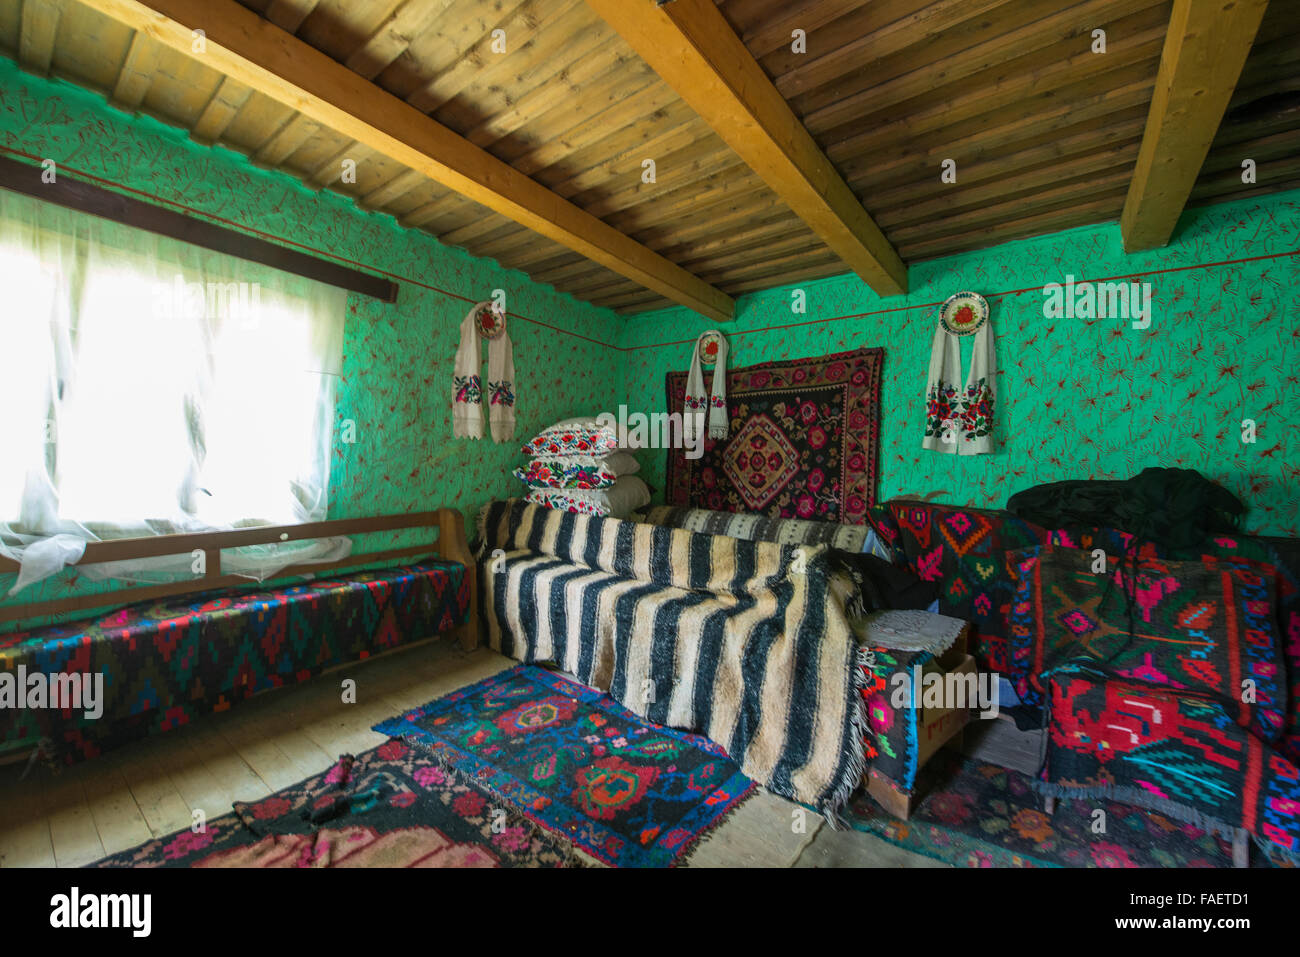 Traditional view of the interior of a house in the district of Maramures, Romania Stock Photo